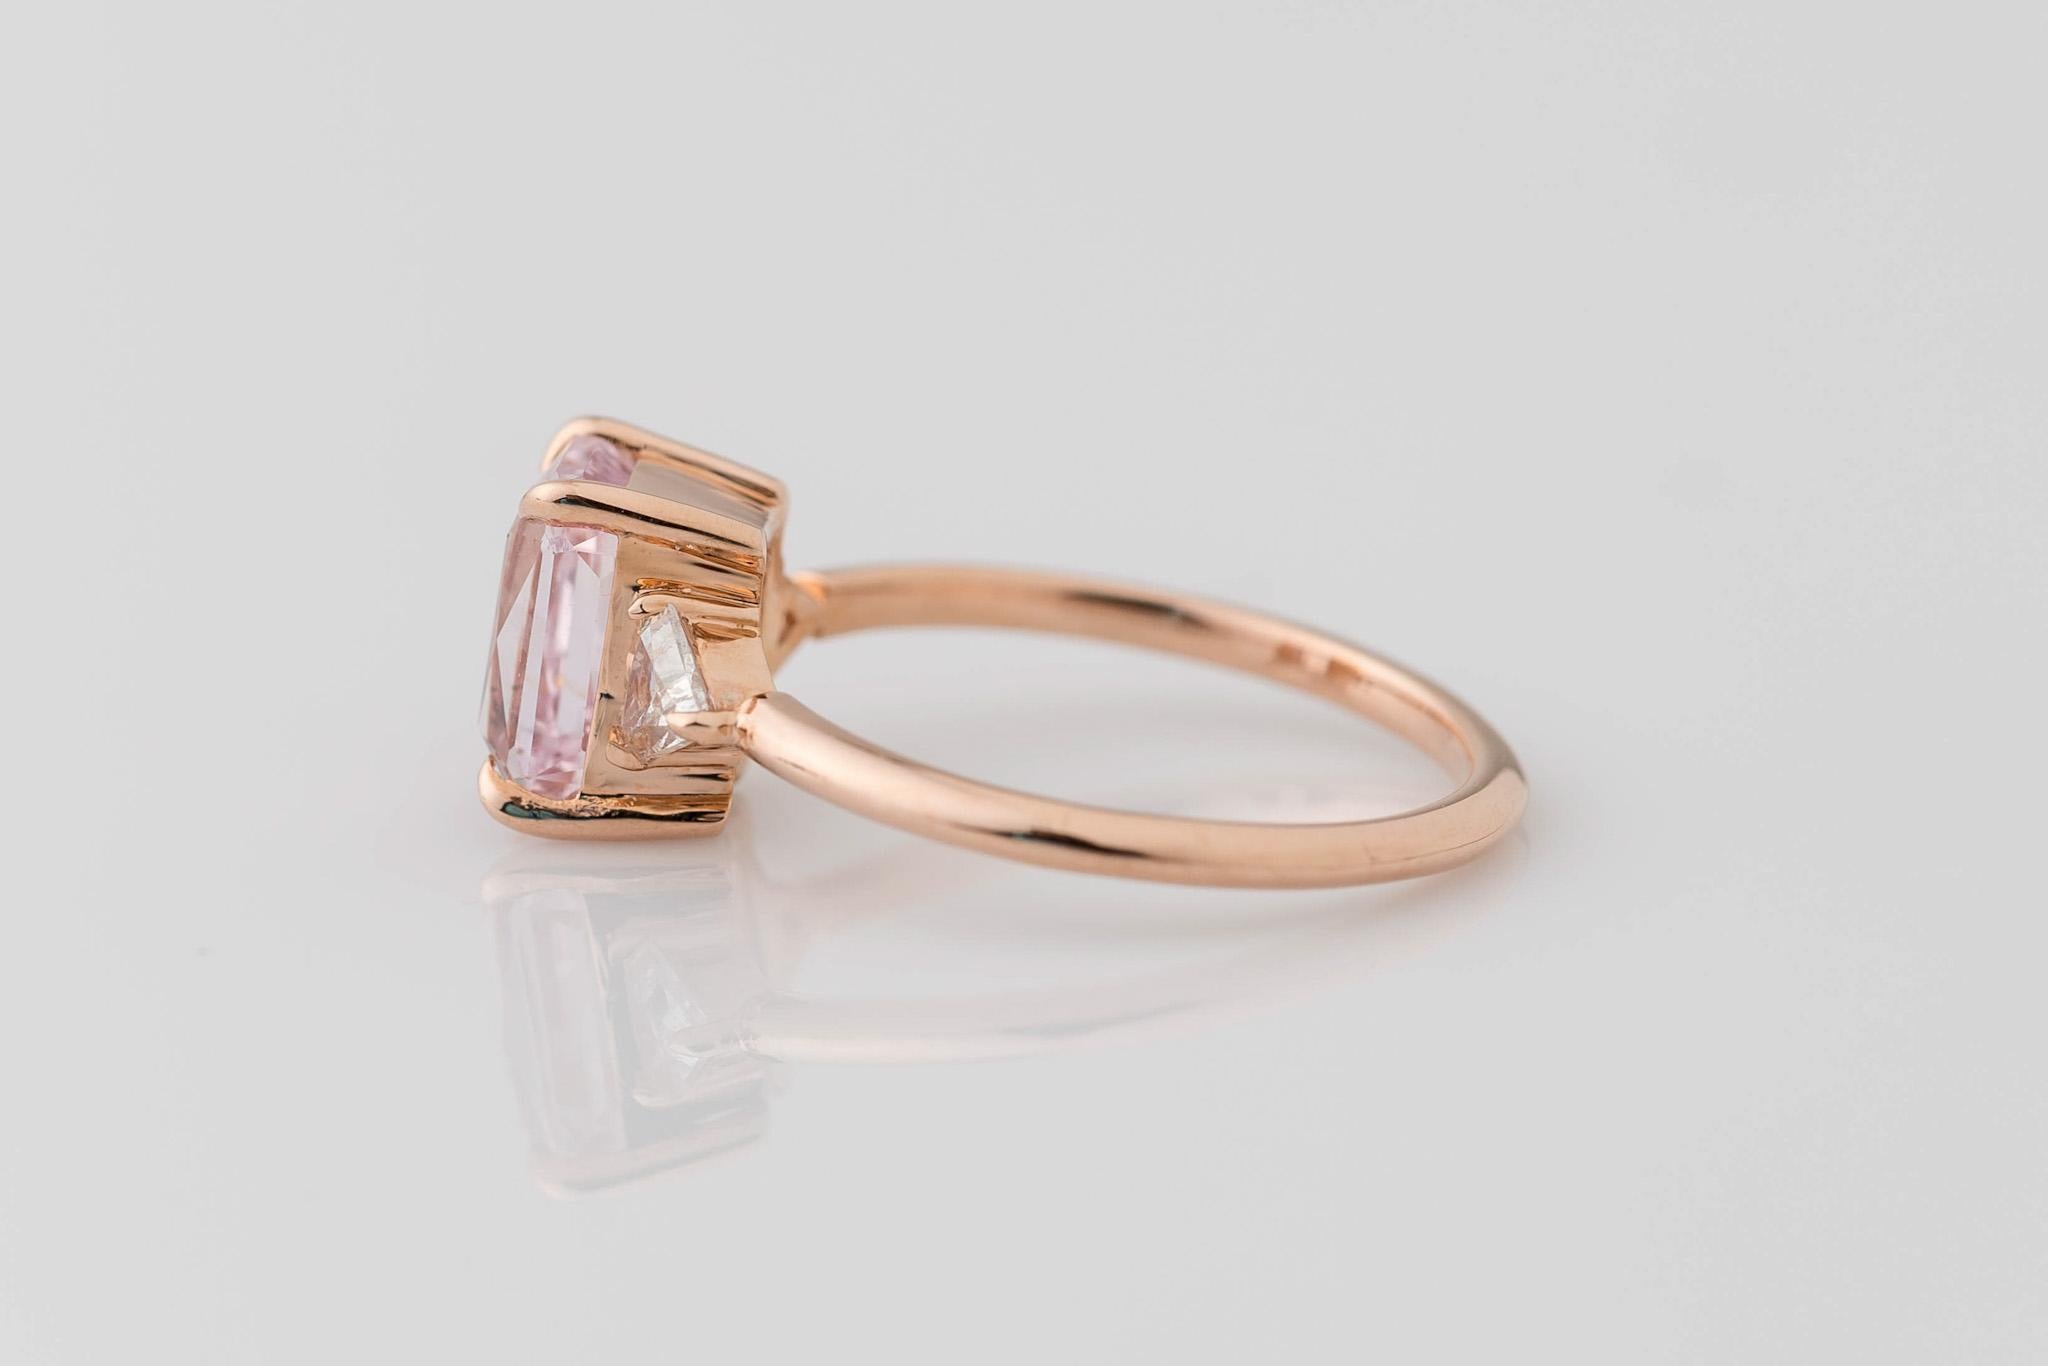 Introducing our exquisite 14K Rose Gold 3-Stone GIA Radiant Cut Peach Sapphire Ring, a mesmerizing blend of elegance and charm! Featuring a stunning GIA-certified 2.54 Ct center stone, measuring 7.91x5.89x4.97MM, this natural and unheated beauty is